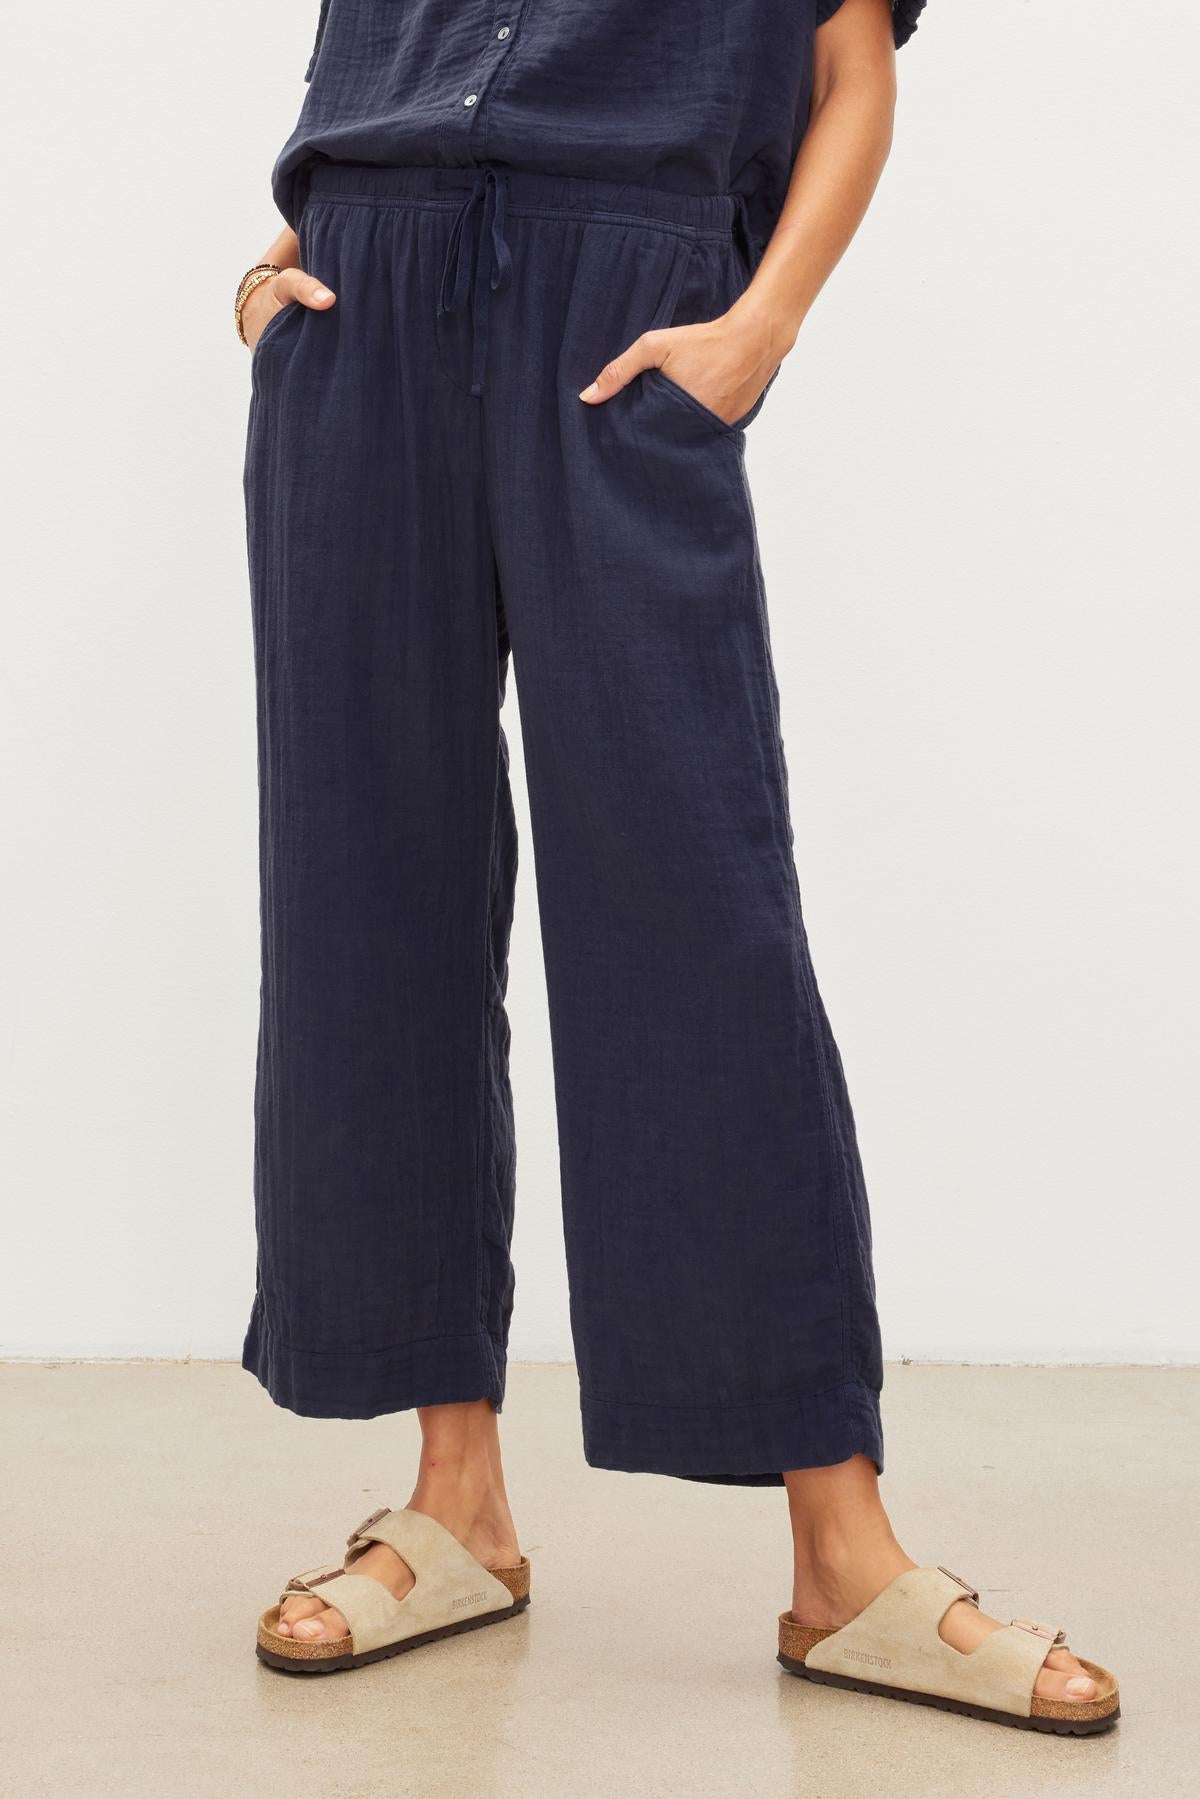 Woman standing in navy blue FRANNY COTTON GAUZE drawstring pants from Velvet by Graham & Spencer with relaxed leg and beige sandals.-36443730149569